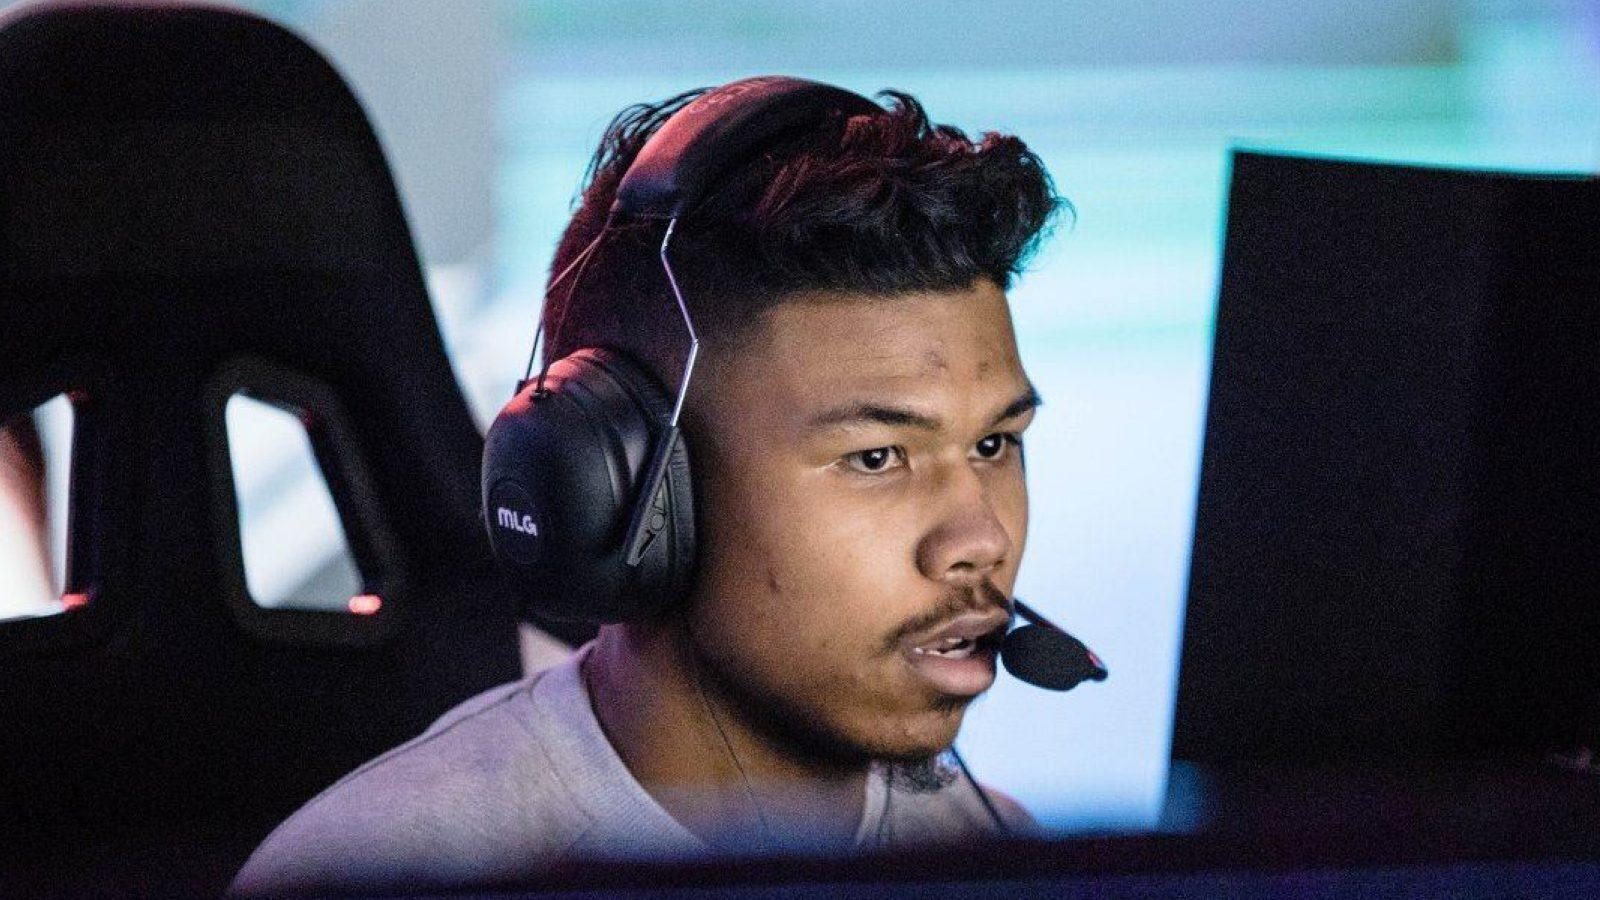 100 Thieves rejoins the Call of Duty scene with the signings of Kenny "Kenny" Williams and Maurice “Fero” Henriquez.